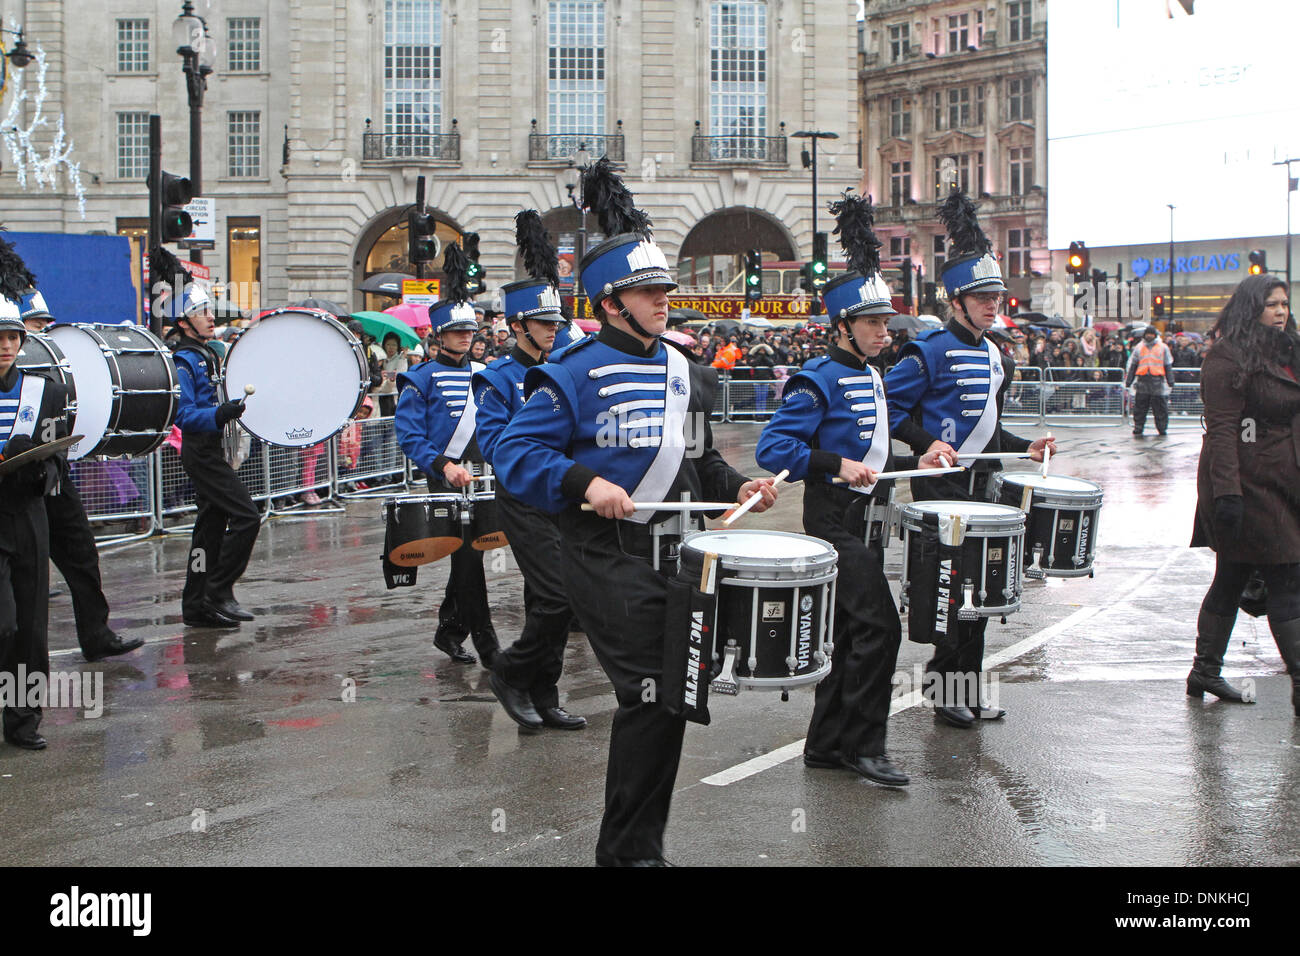 London,UK,1st January 2014,J.P Taravella high school from Florida playing at the London's New Year's Day Parade 201 Credit: Keith Larby/Alamy Live News Stock Photo